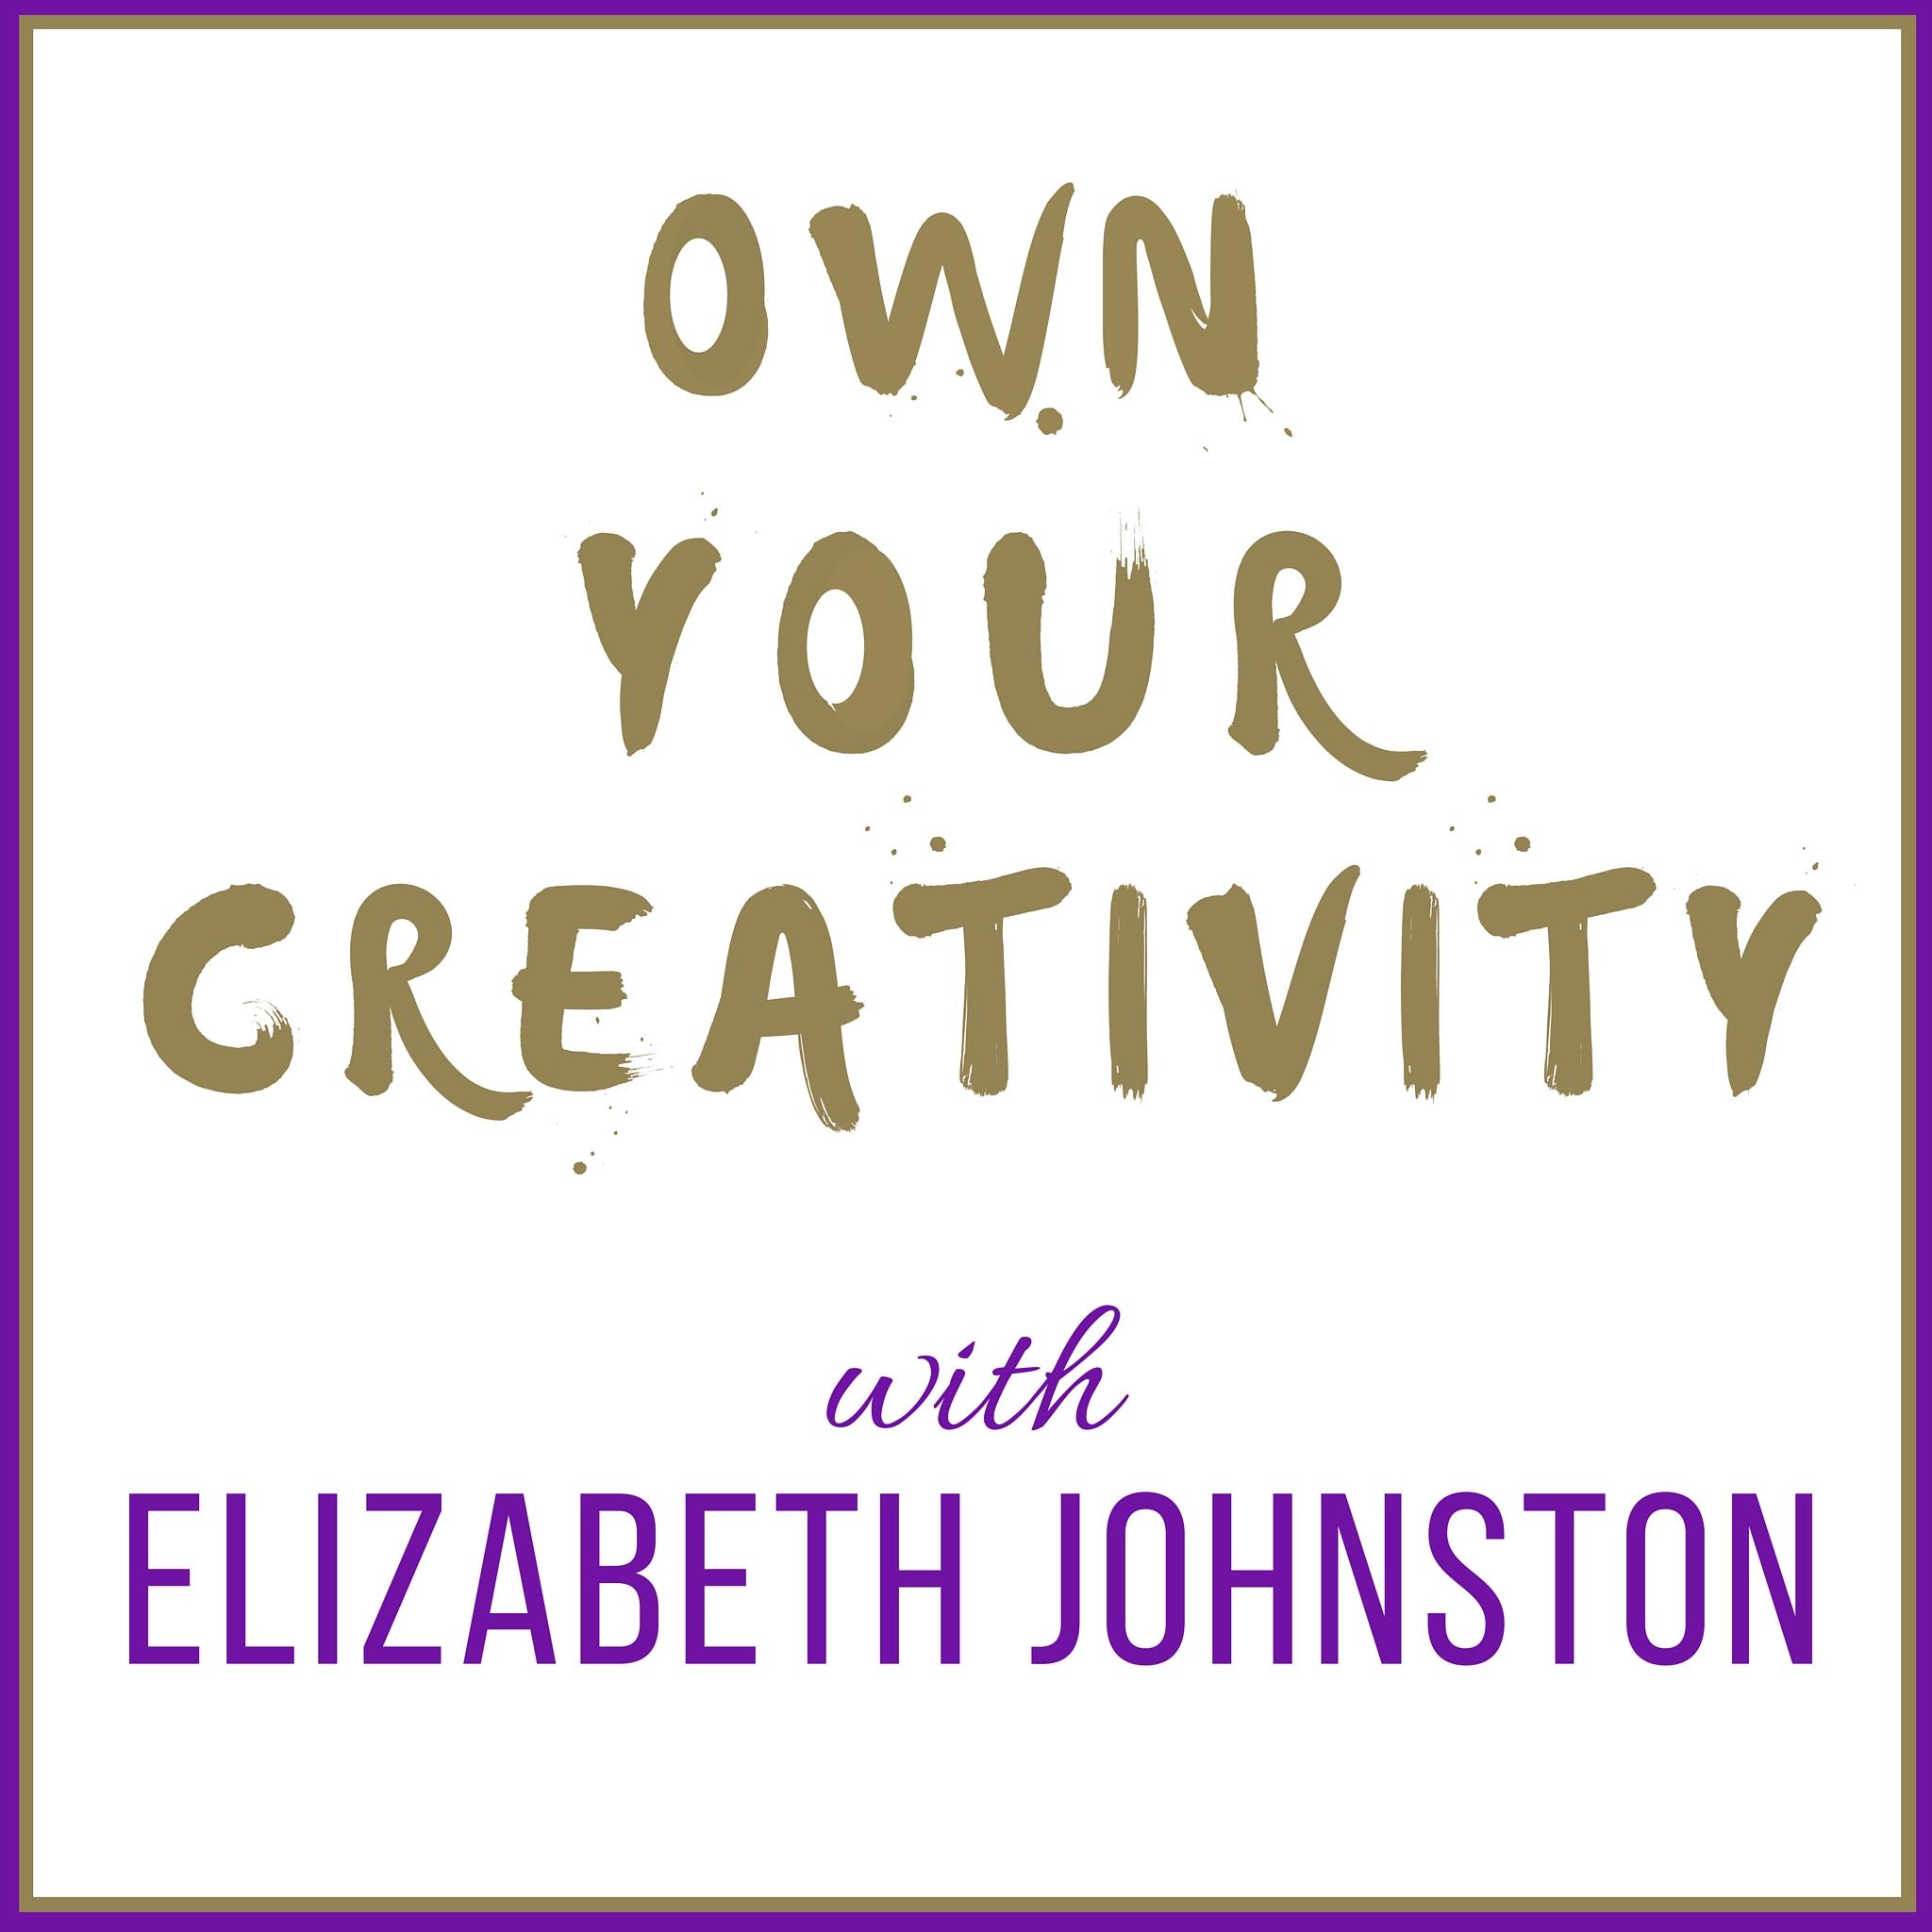 009 Creativity is the Soul Breathing with Sylvie Filiatreault